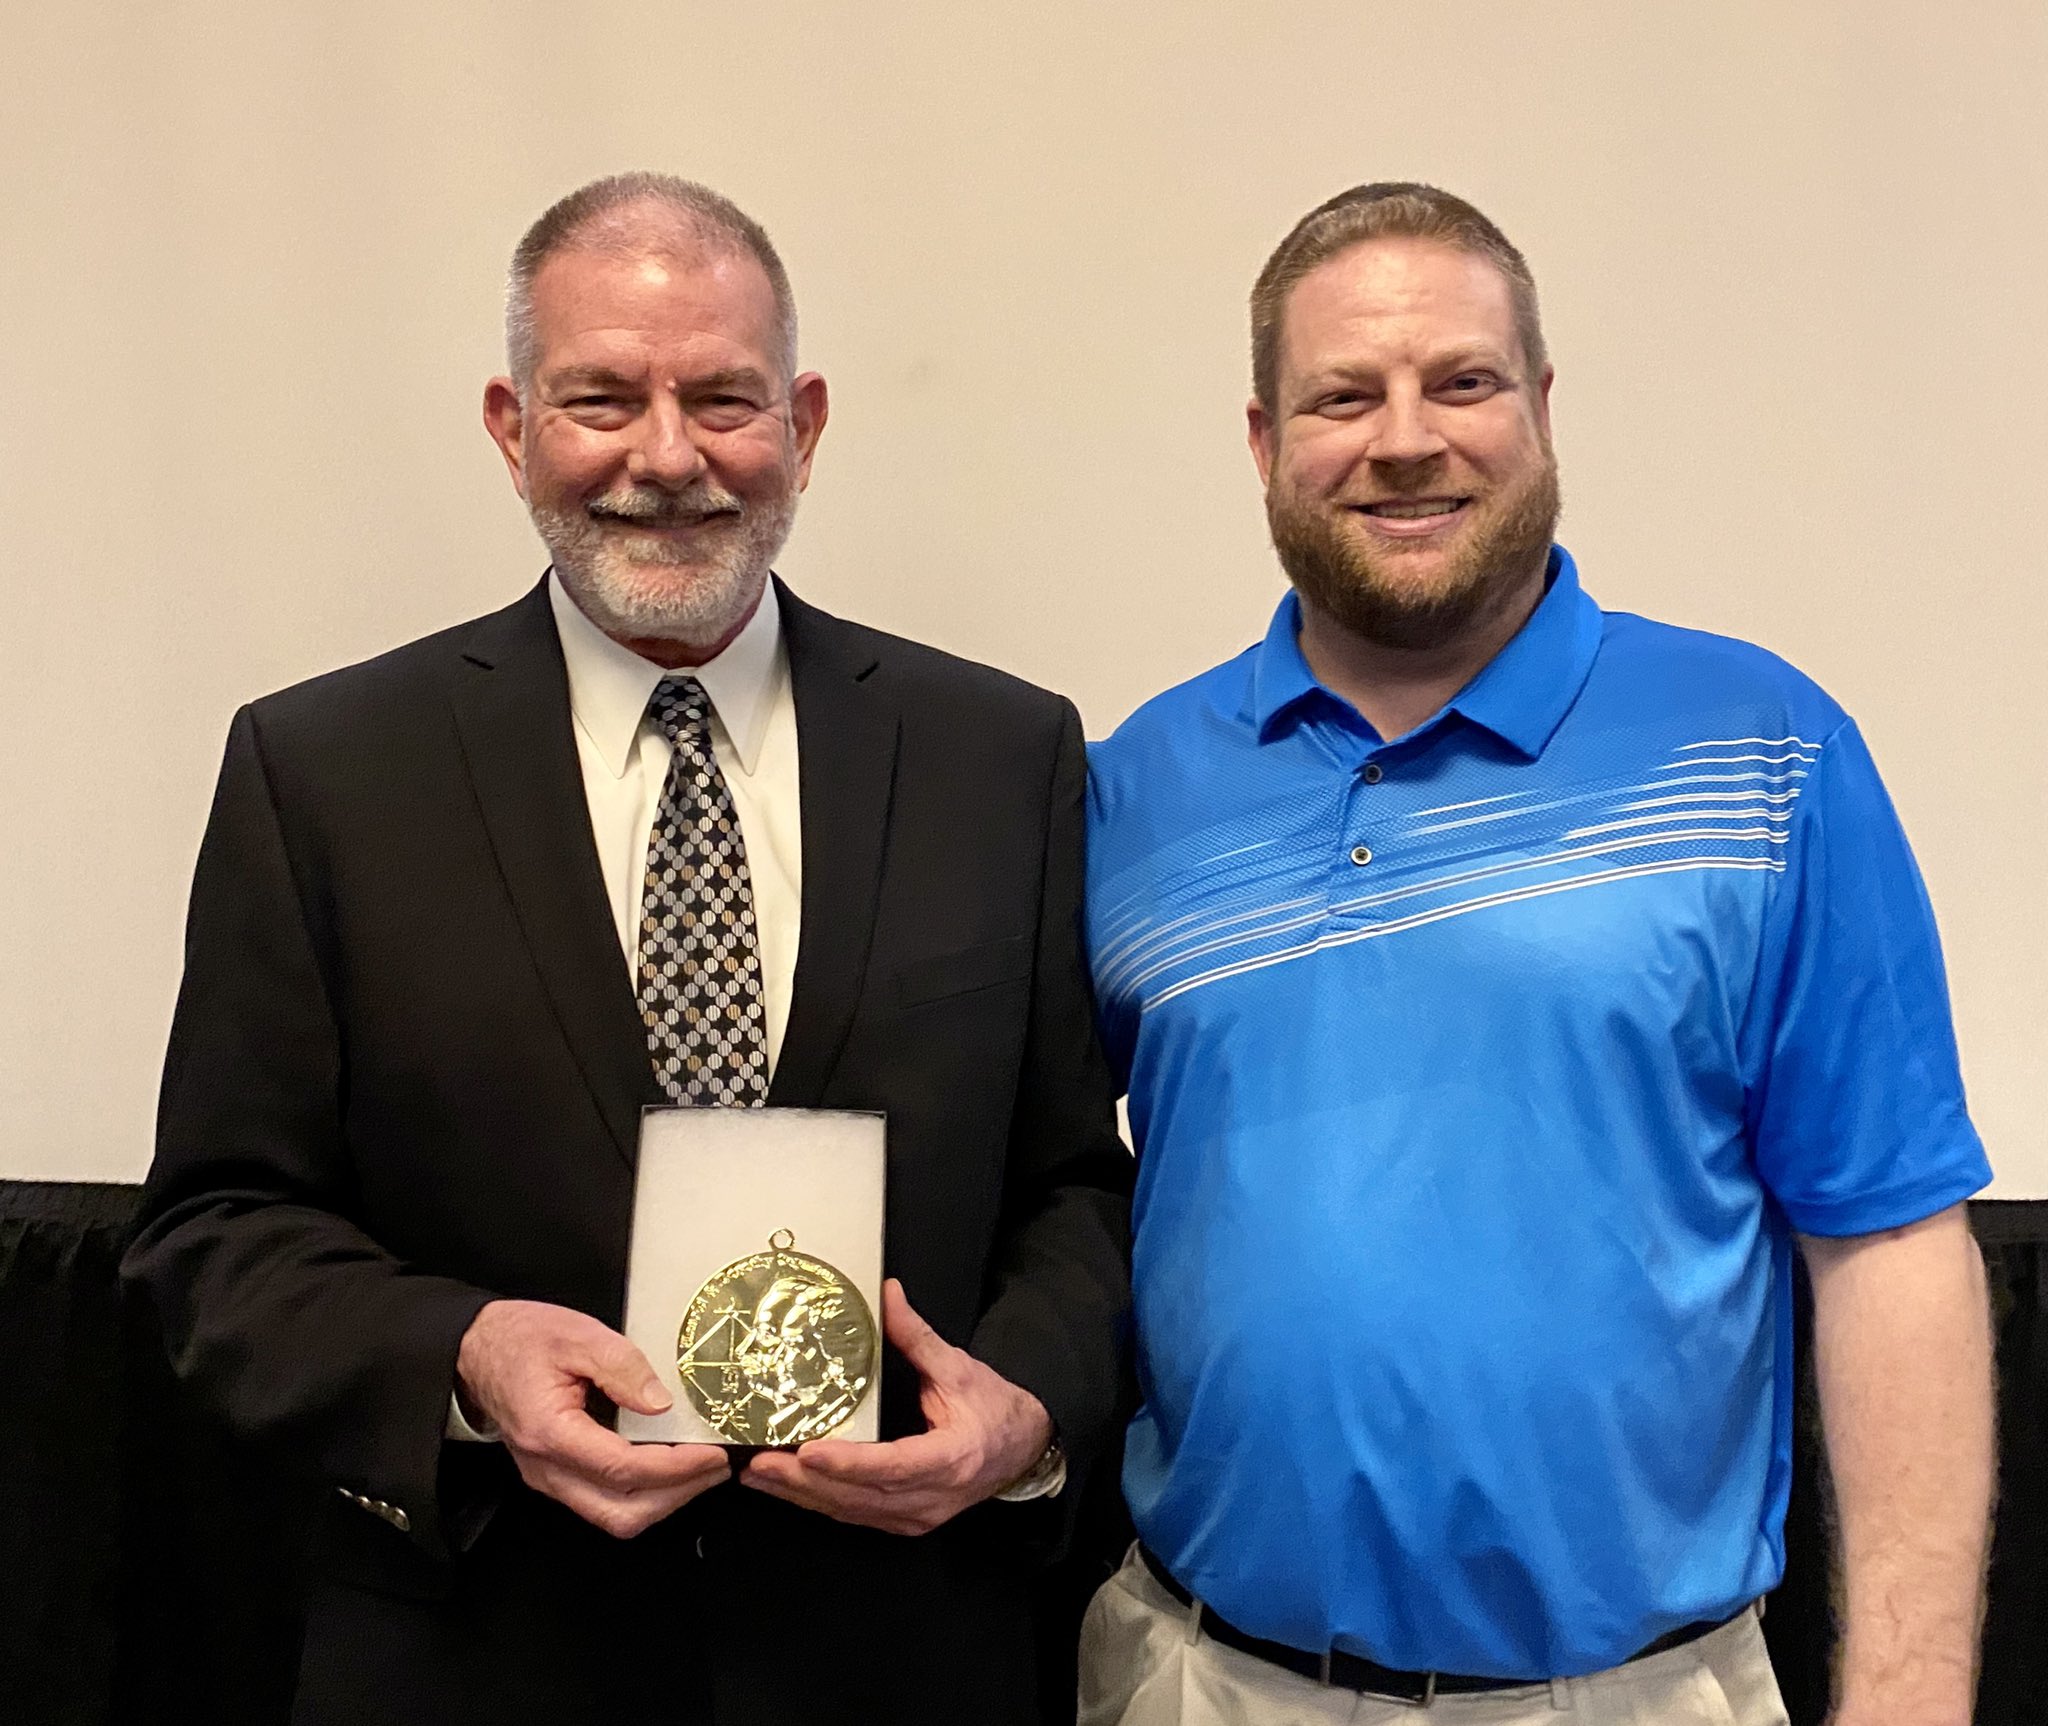 2022 Seymour Medal winner Steven Treder, left, received his award during the 29th annual NINE Spring Training Conference on Saturday, March 5, in Tempe, Arizona. The medal was presented by SABR's Jacob Pomrenke. (Photo: Tracy Greer)